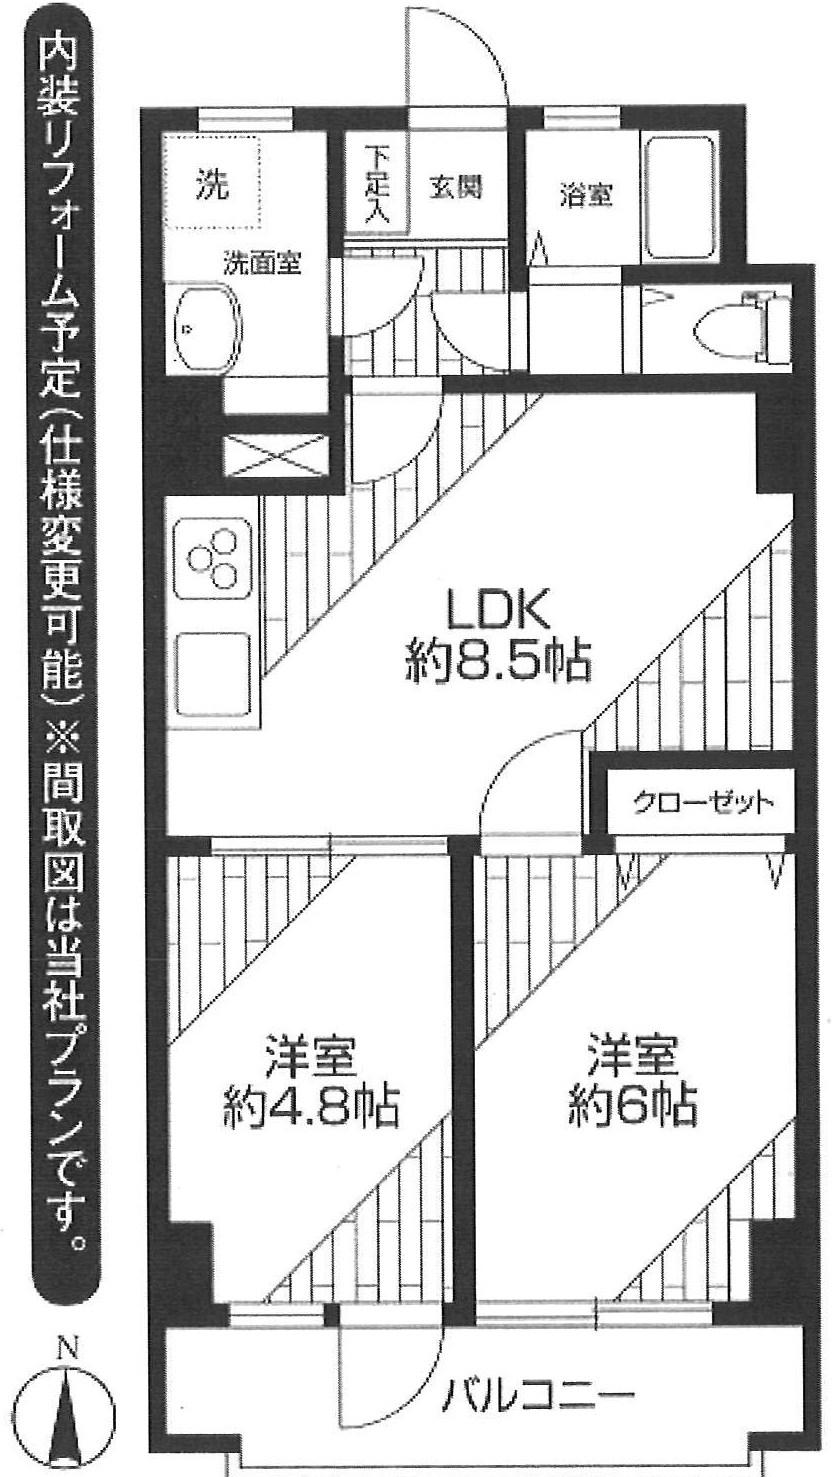 Floor plan. 2DK, Price 17.8 million yen, Occupied area 45.36 sq m , 2DK of easy-to-use distribution type of balcony area 5.16 sq m south-facing.